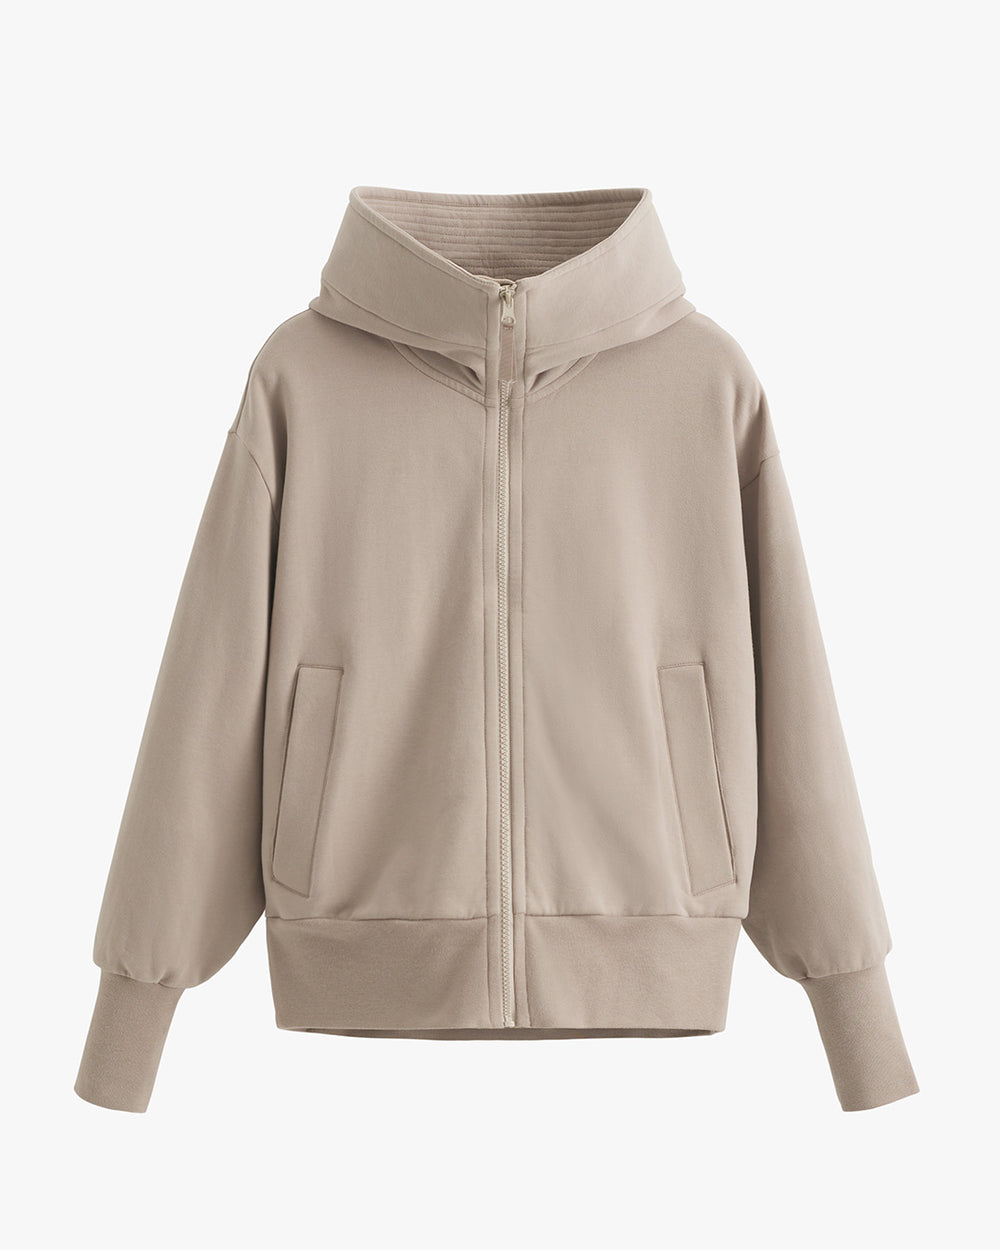 Hooded jacket with a zipper and front pockets on a plain background.